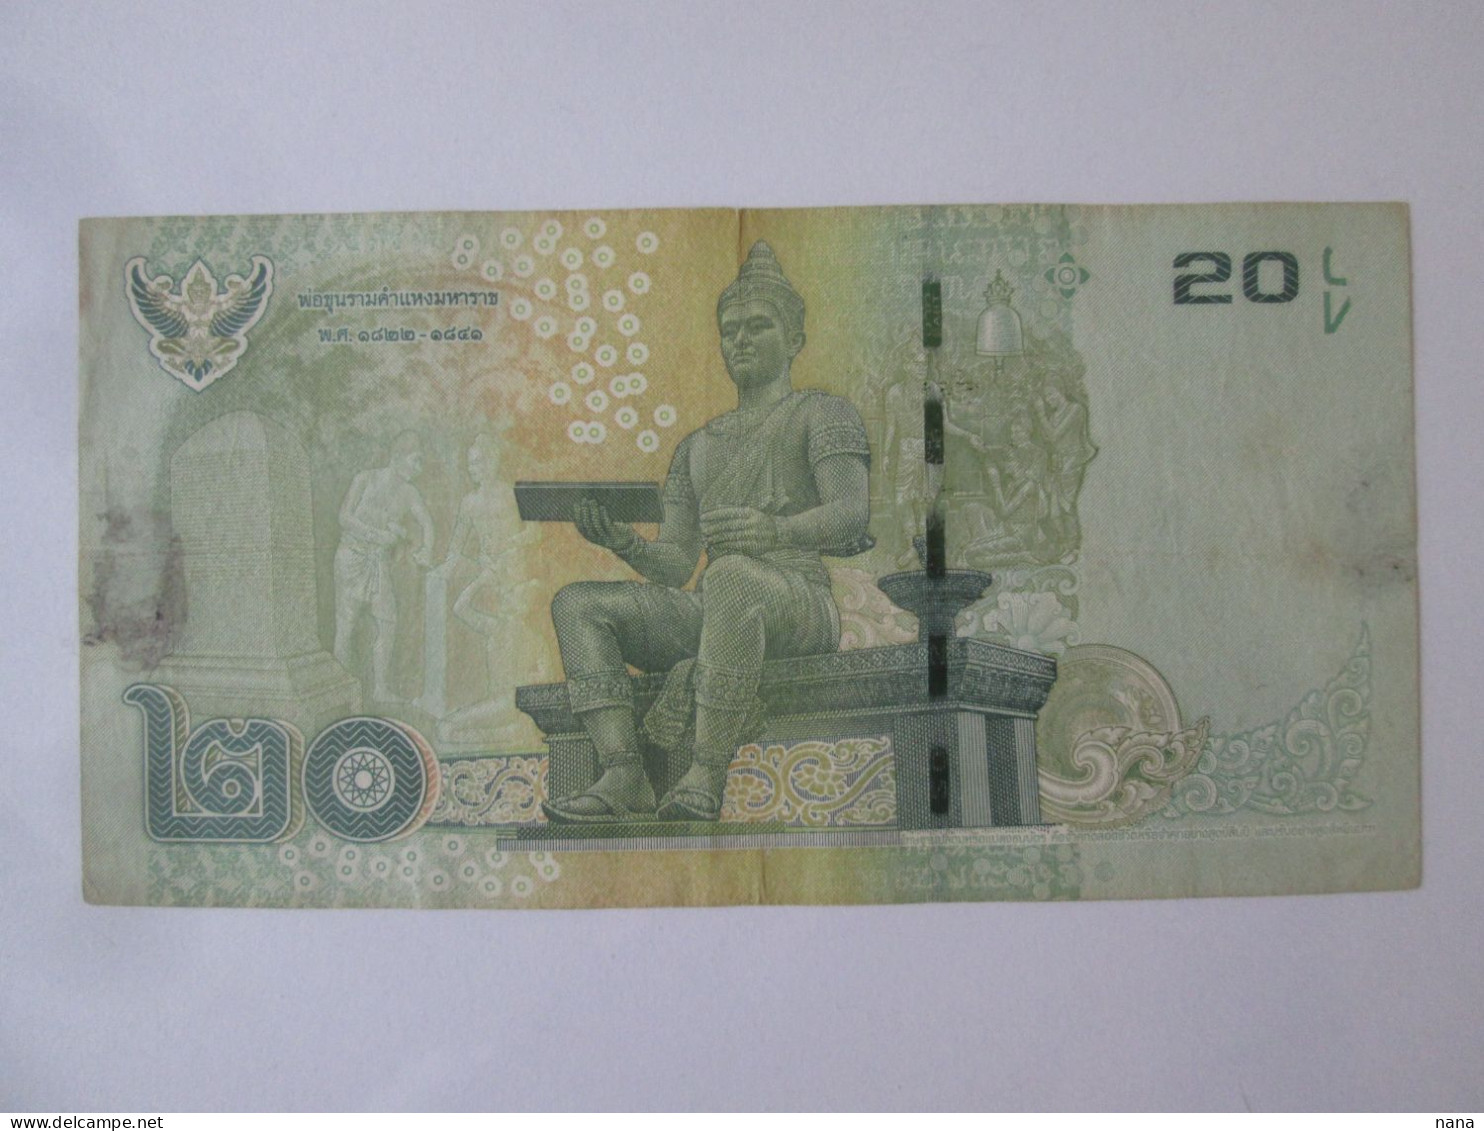 Thailand 20 Baht 2013 Banknote See Pictures - Thailand